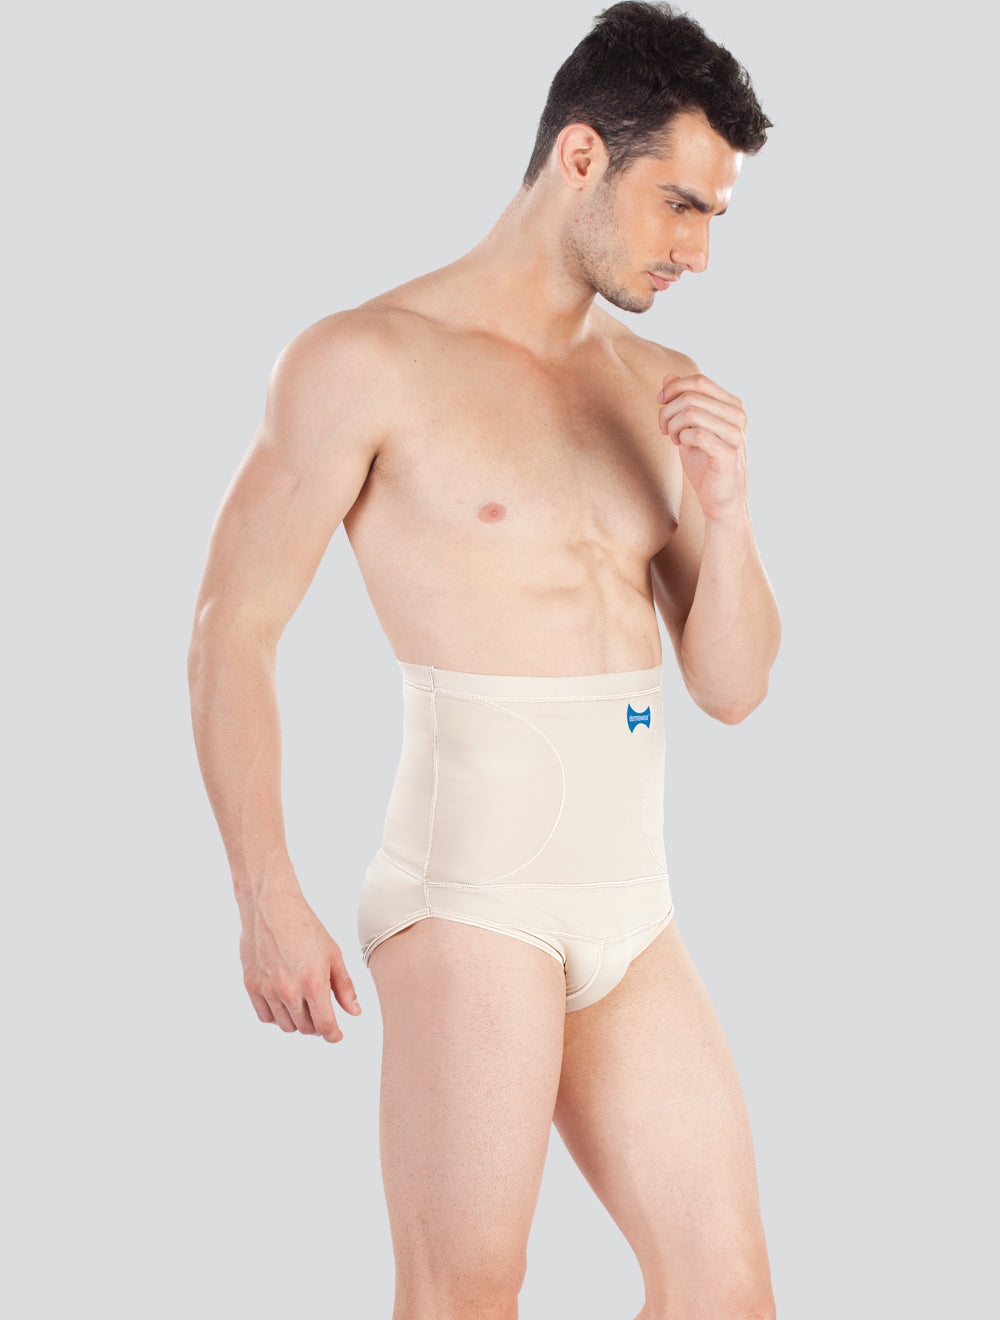 Dermawear - Rated and approved! Our customers can't get enough of Dermawear Tummy  Tight Men's Shapewear. Discover why they rave about it. Shop now and  embrace your best self! #MensTummyTucker #Dermawear #